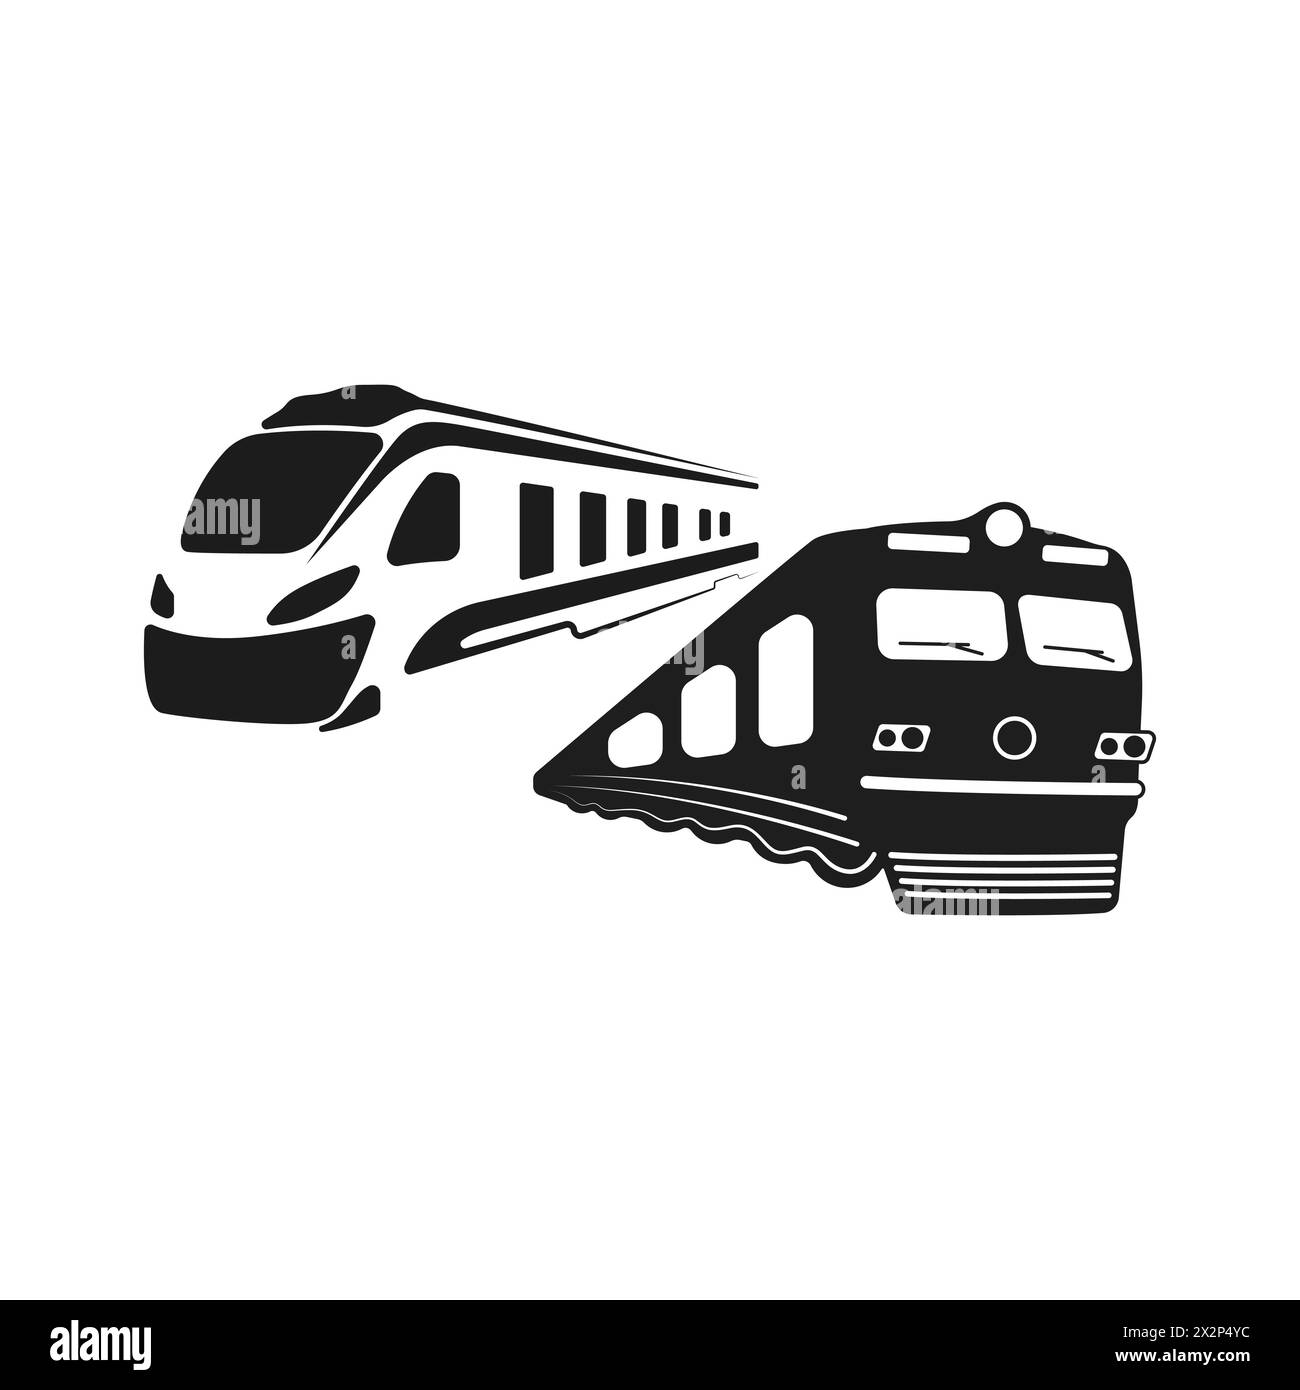 Two train silhouettes for railway companies vector. Railroad logo vector icon. Crossing of trains vector. Movement of trains in different directions. Stock Vector